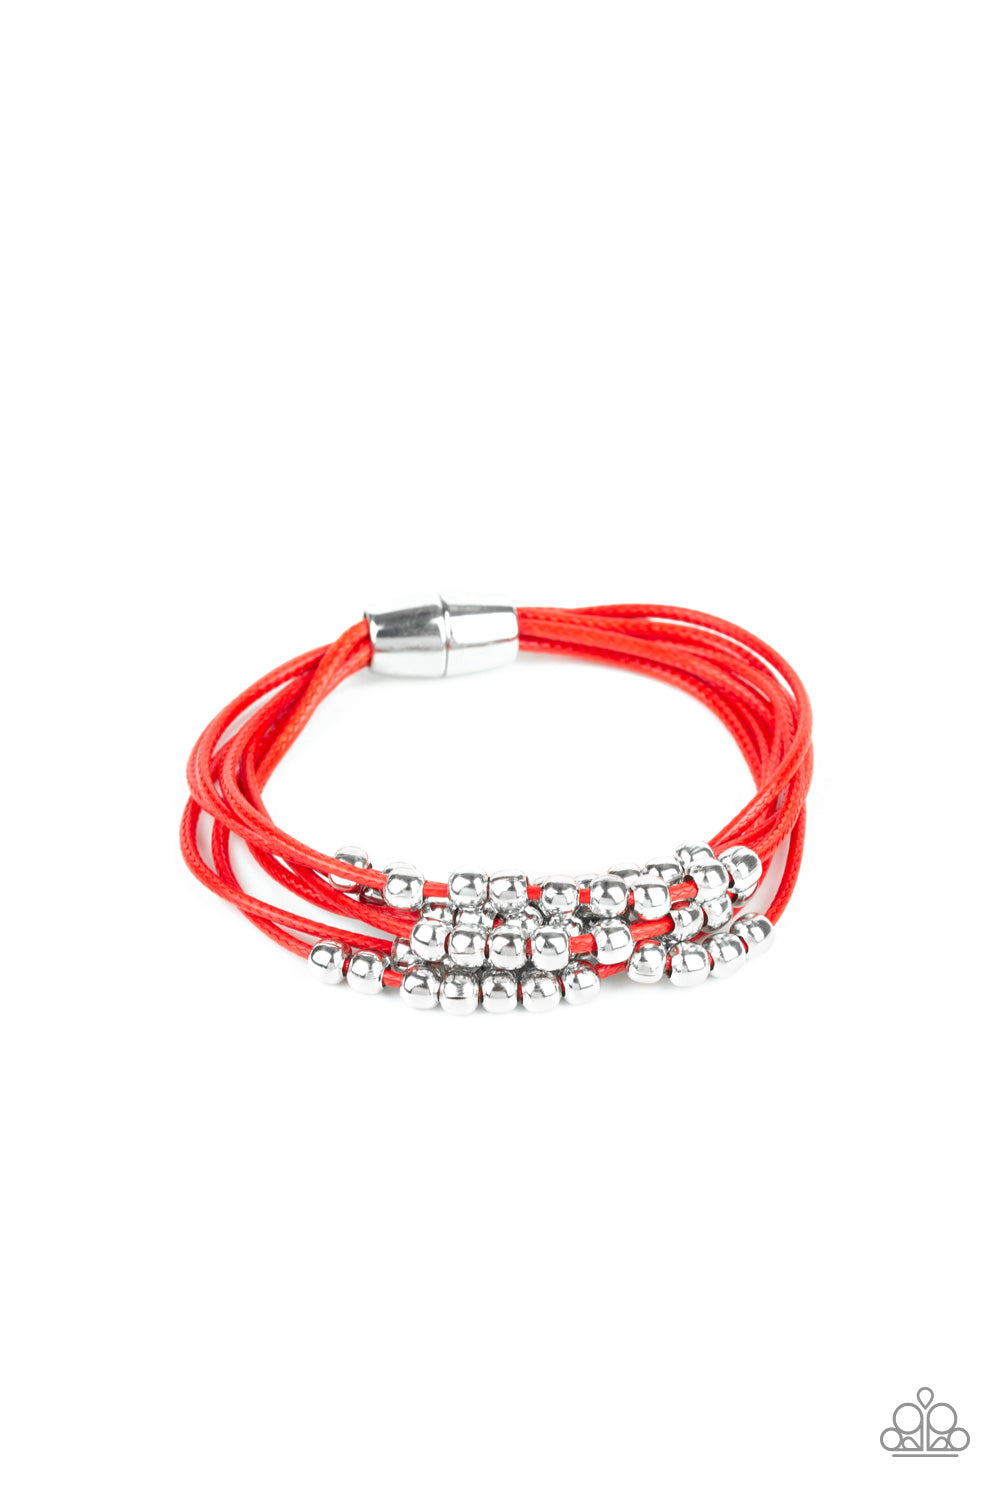 Paparazzi Mega Magnetic - Red Cords - Silver Beads - Magnetic Closure - Bracelet - $5 Jewelry With Ashley Swint